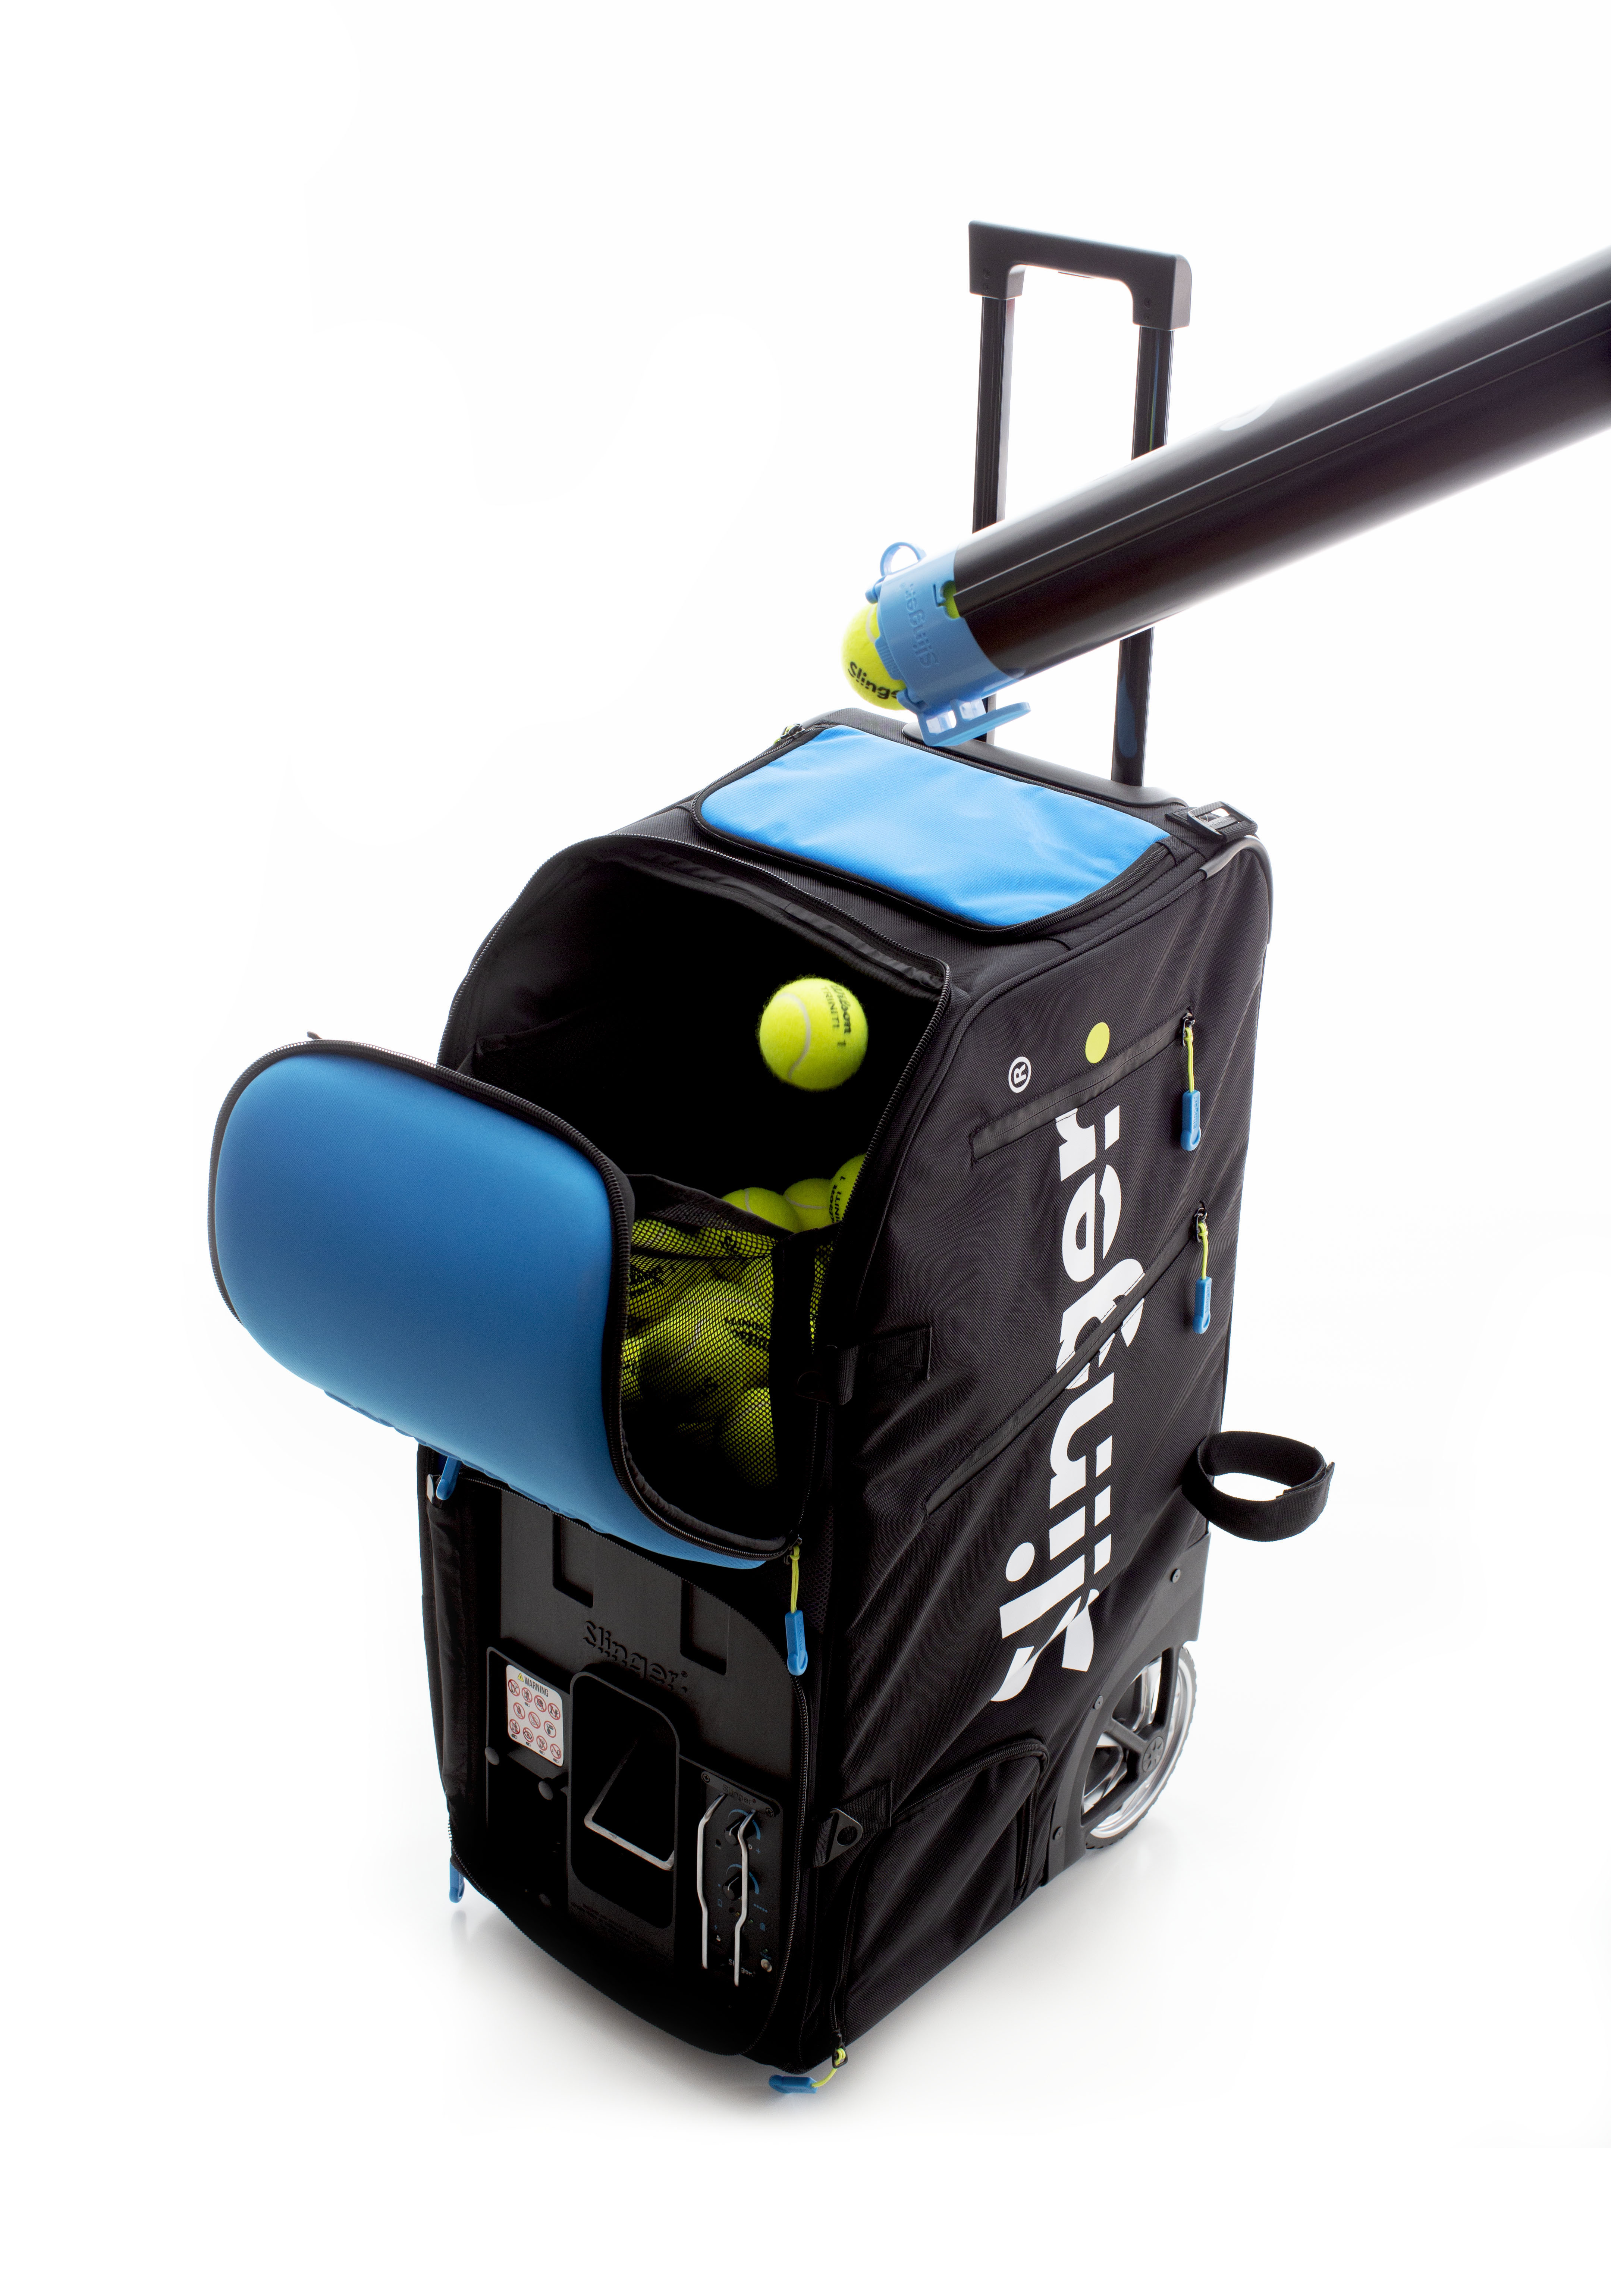 The Slinger Bag now available at Tennis-Point!